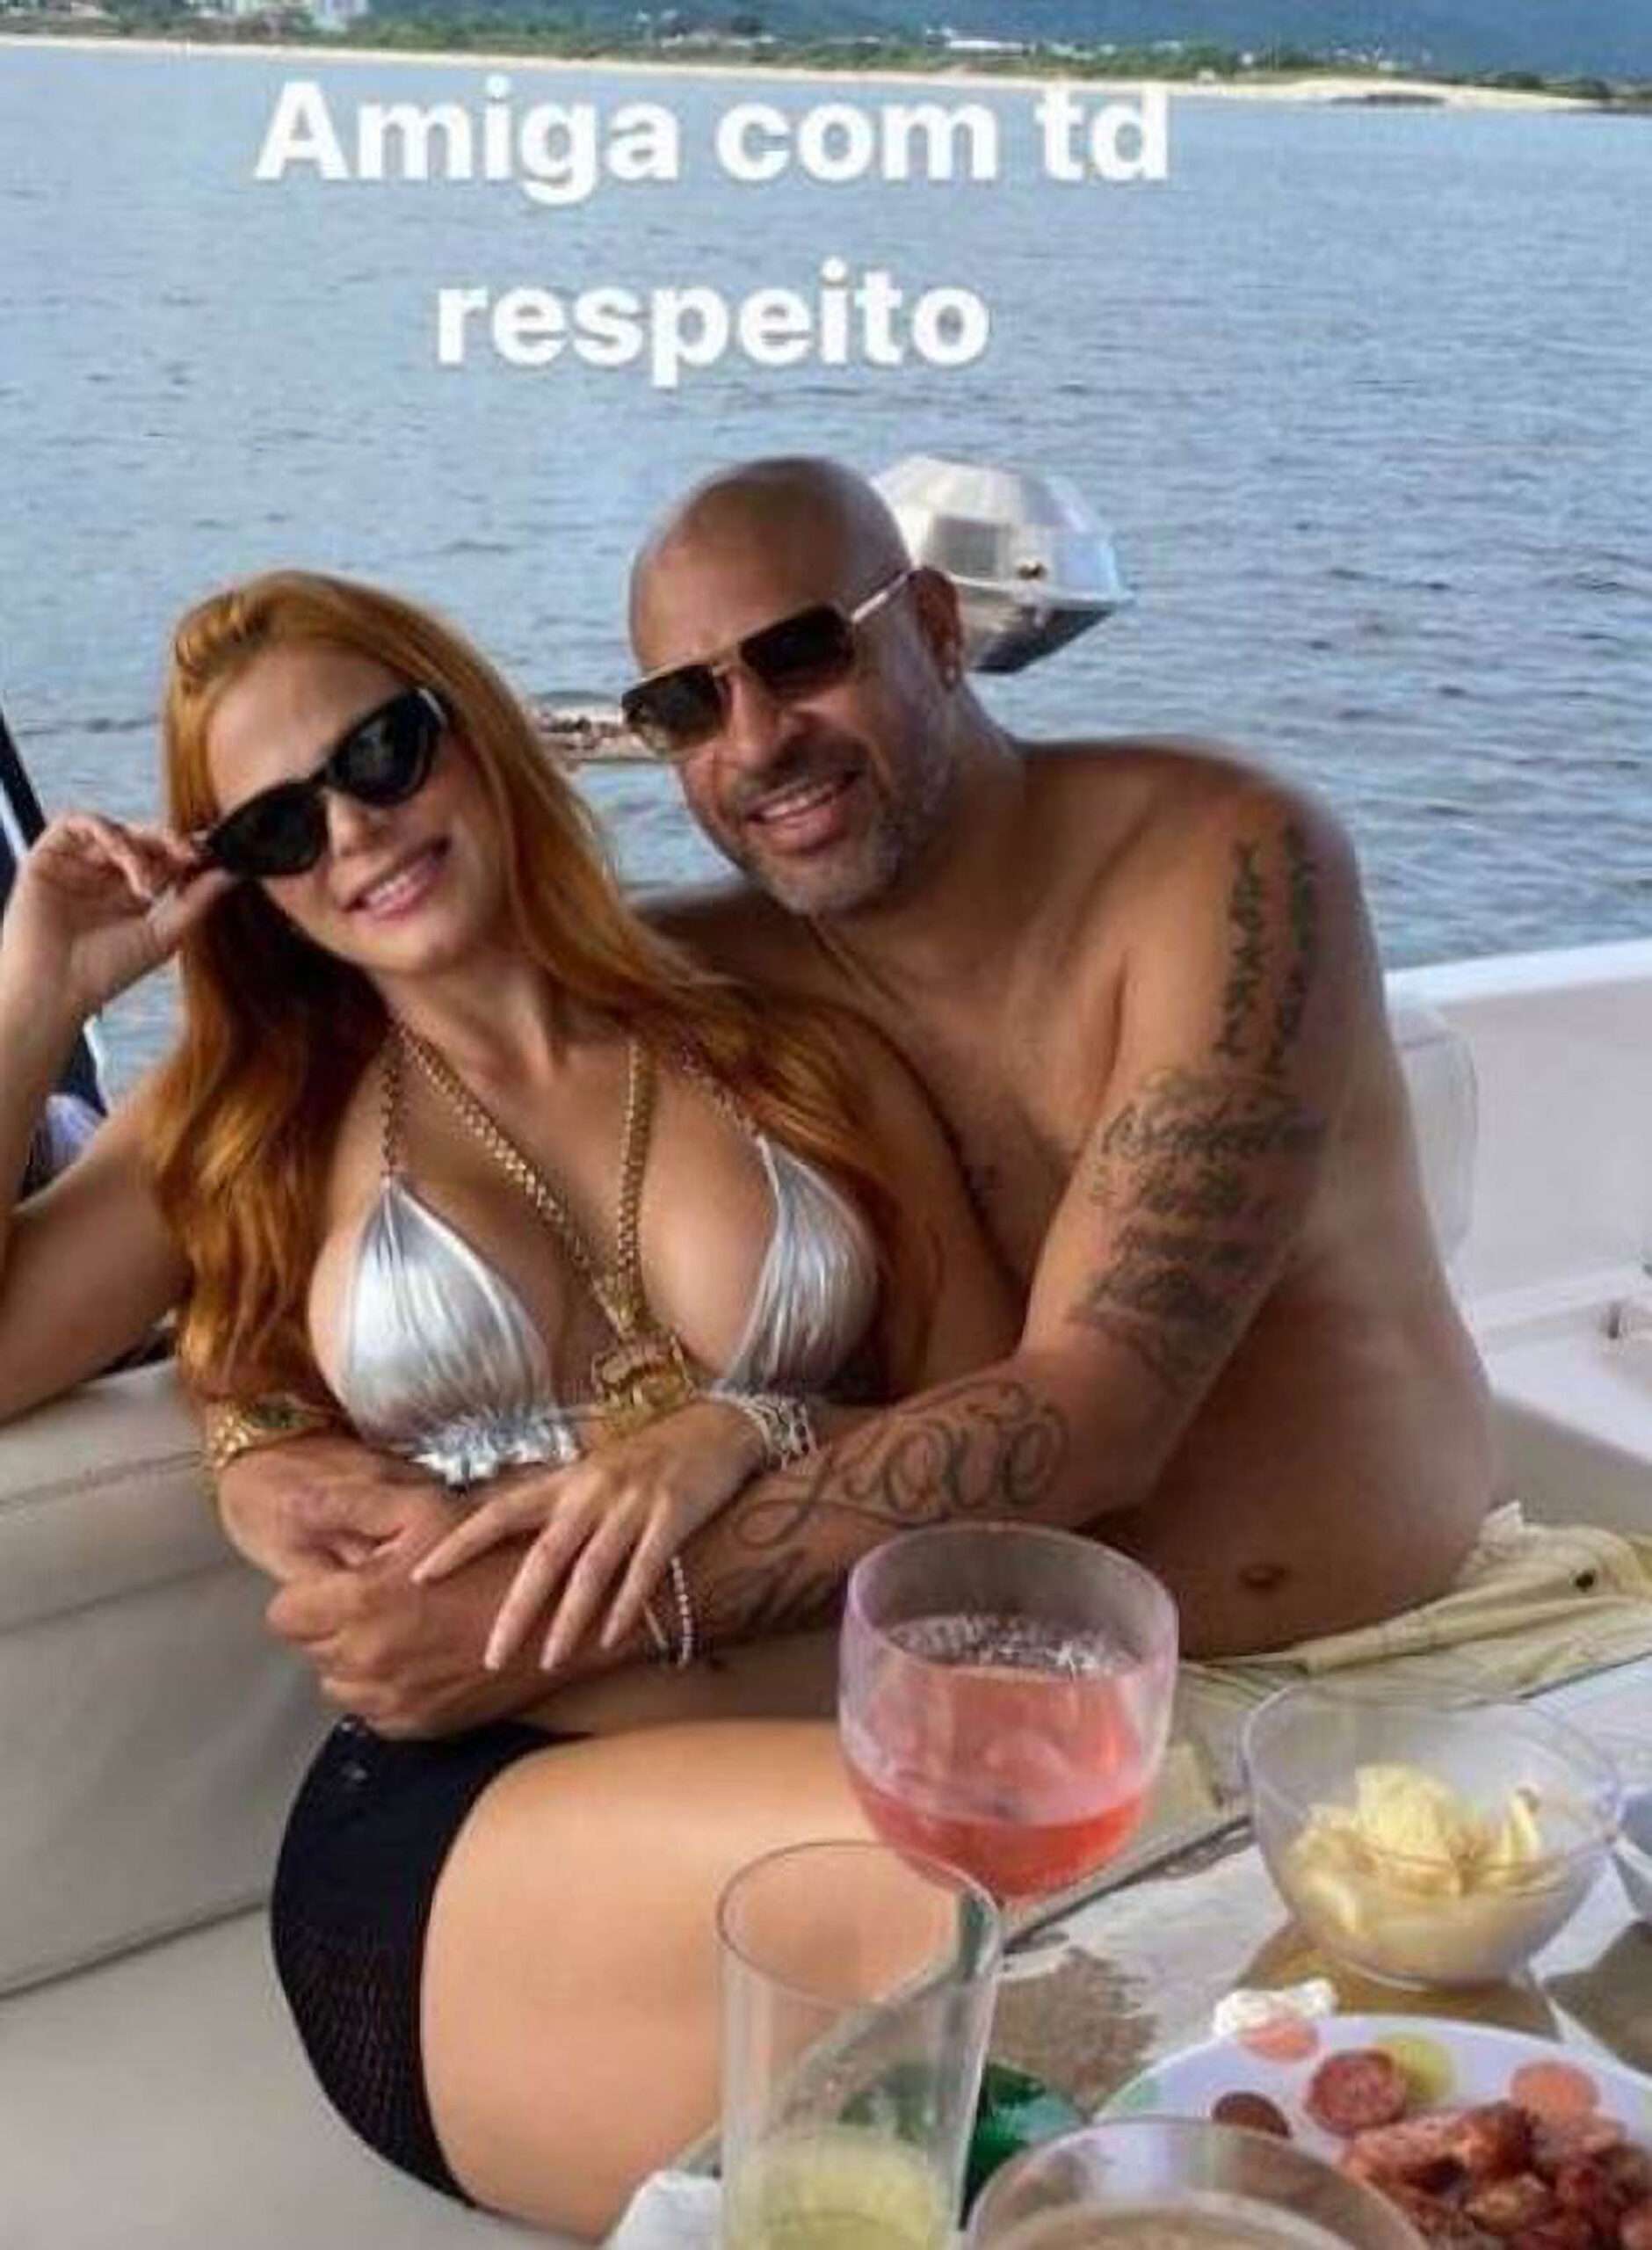 Read more about the article ADRIANO’S NEW FLAME? Player’s Wife Asks For Divorce Papers After He Posts Snaps With Pretty Redhead From Birthday Yacht